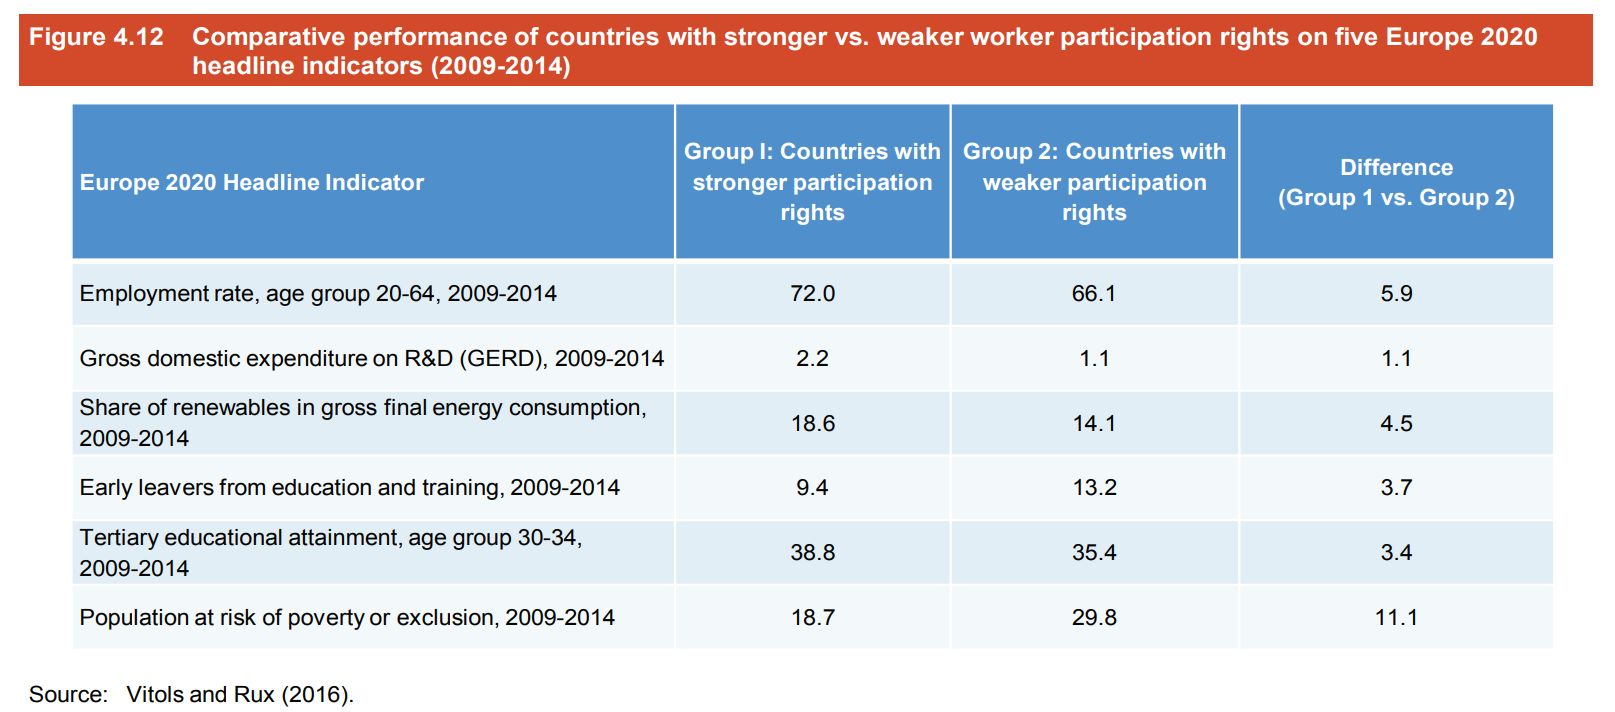 EPI 2.0 countries with weaker vs stronger particpation rights